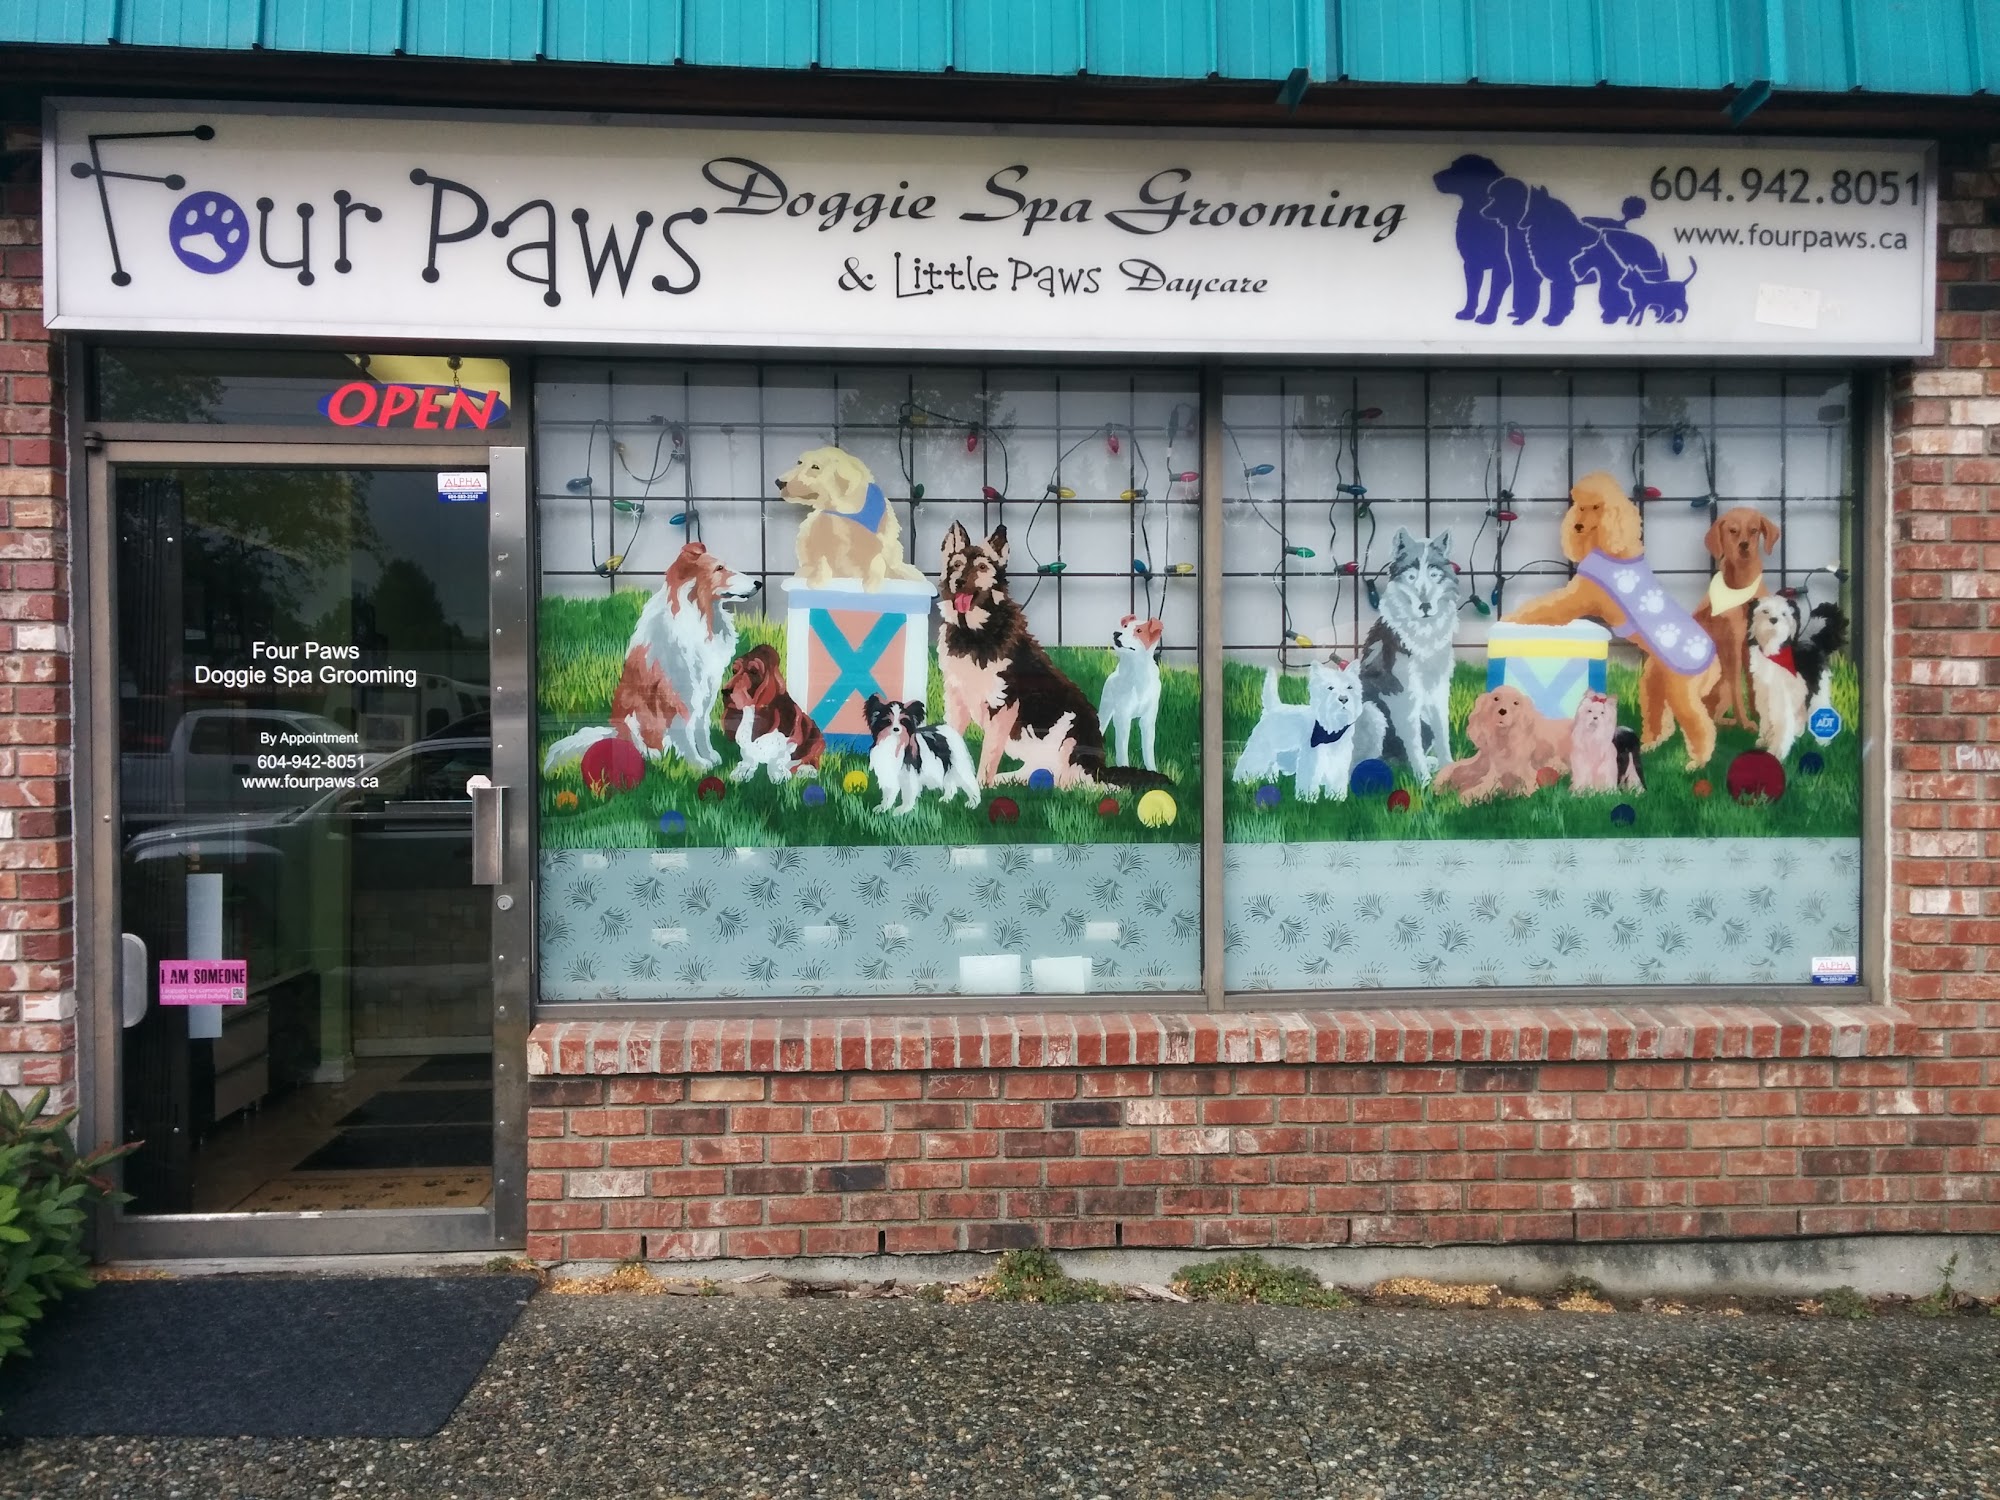 Four Paws Doggie Spa Grooming